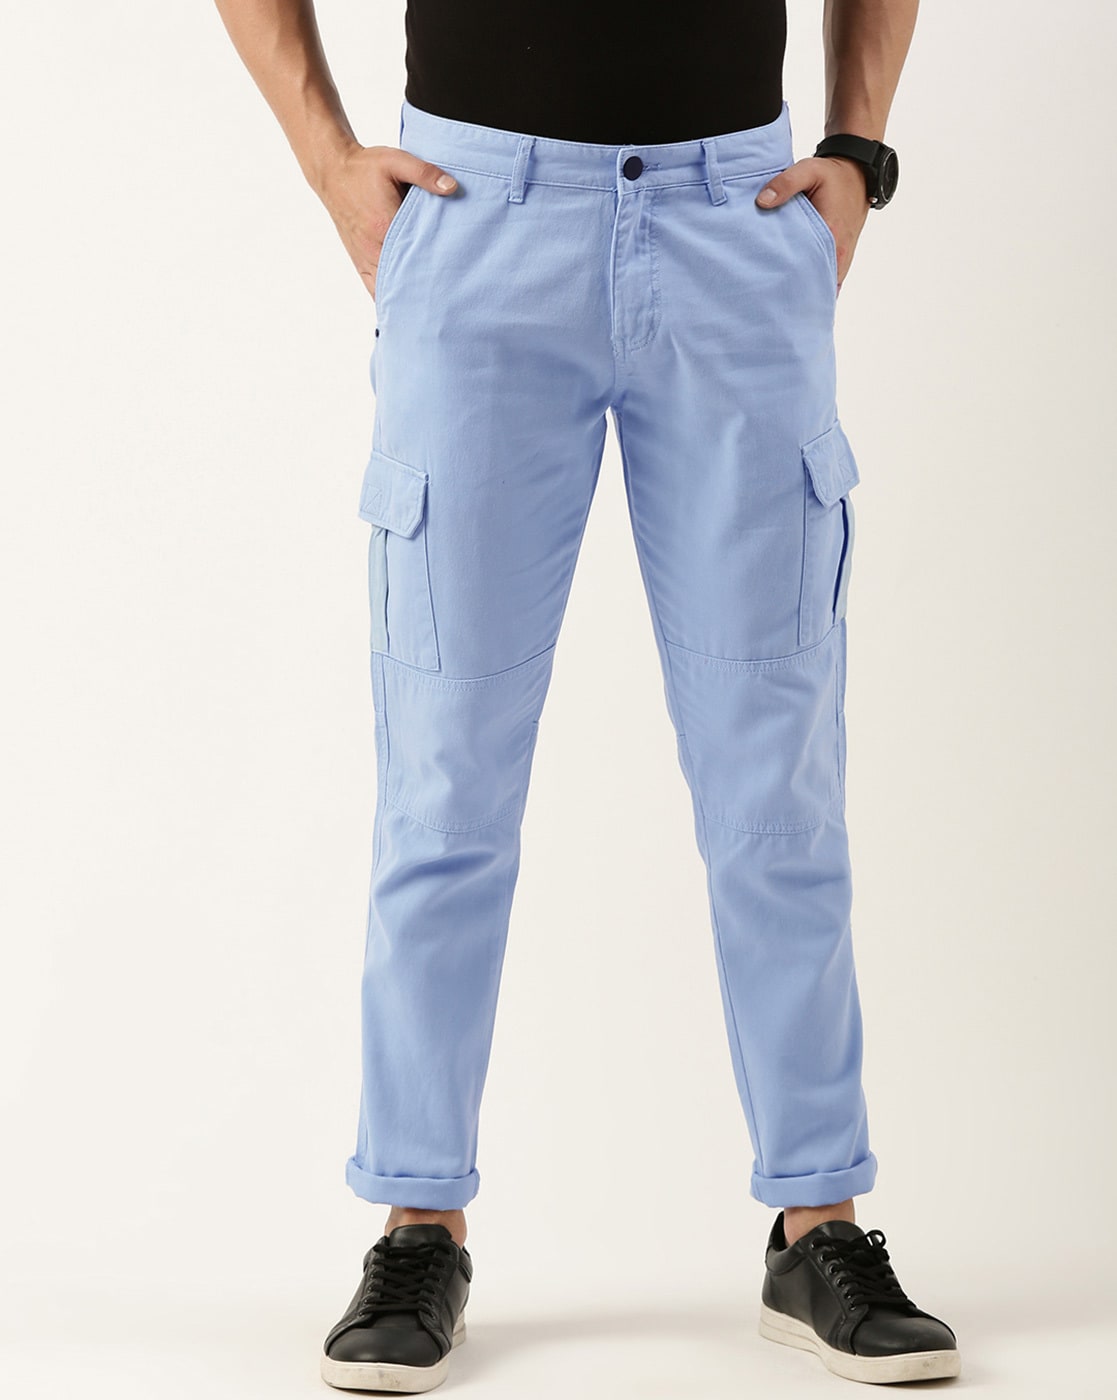 Buy Blue Trousers & Pants for Men by iVOC Online